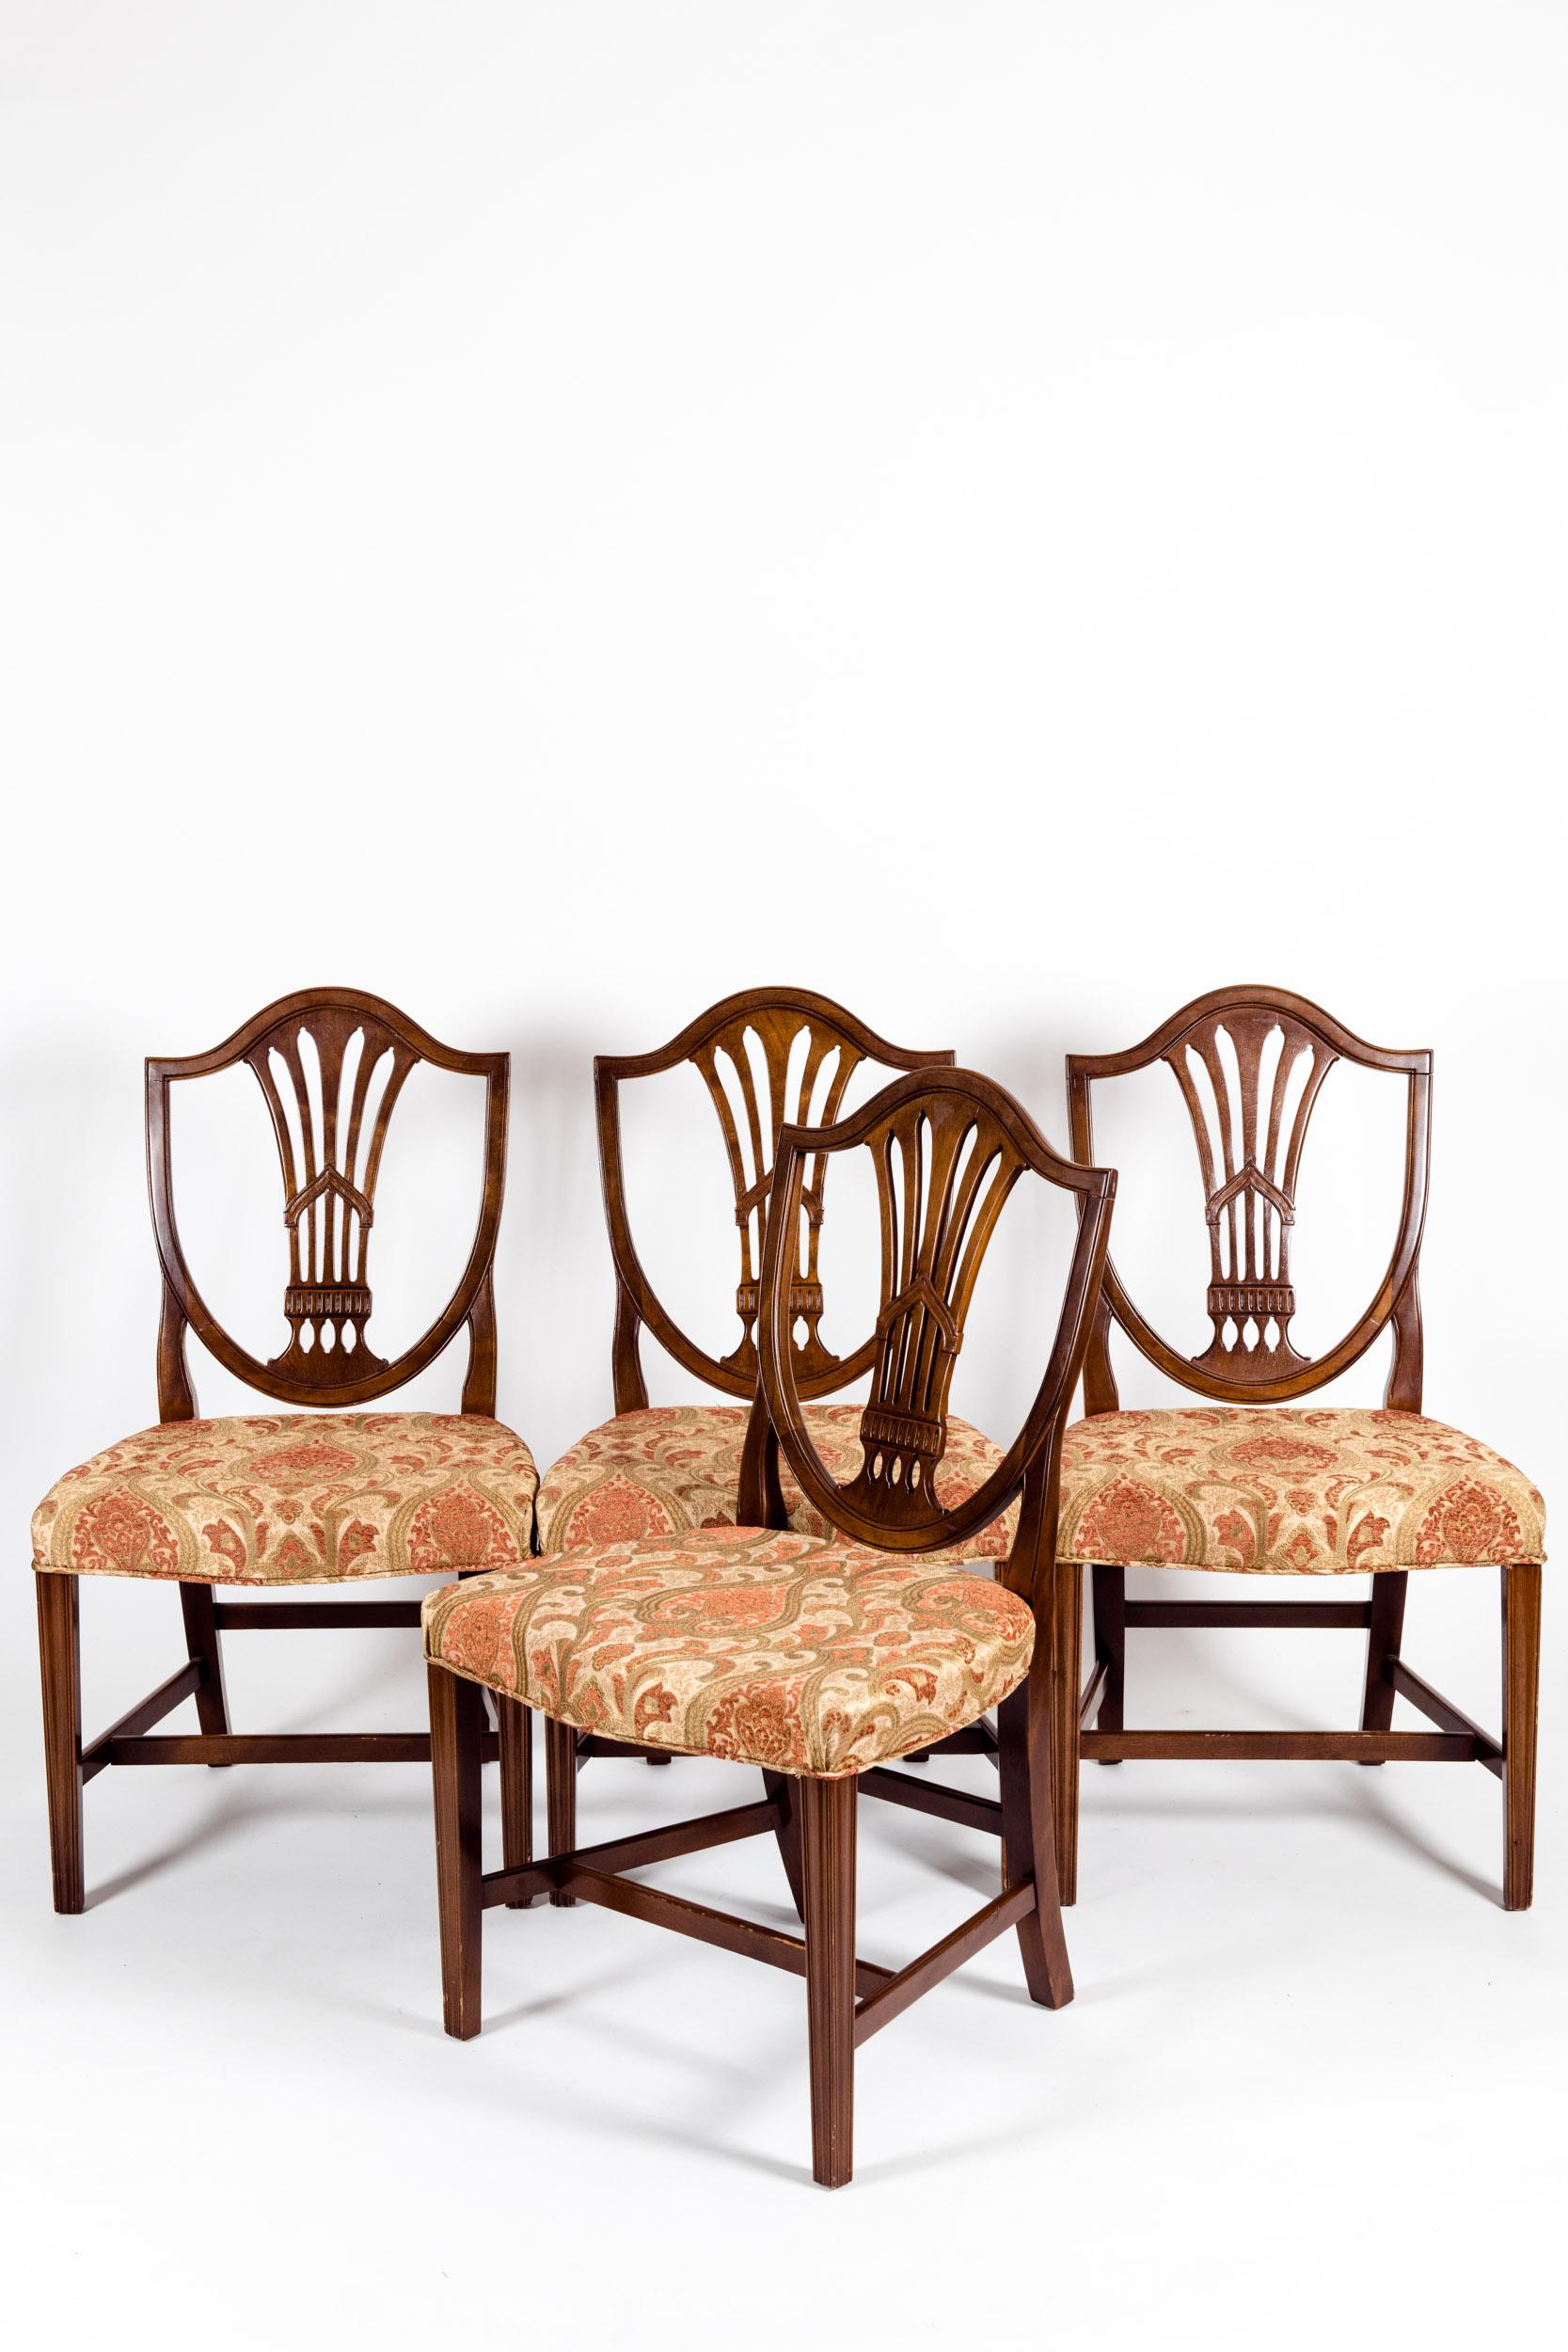 Solid mahogany wood shield back set of four dining chairs. Each chair is in excellent vintage sturdy condition. Minor wear consistent with use / age. Very immaculate upholstery. American craftsmanship, early 20th century. Each chairs measure about